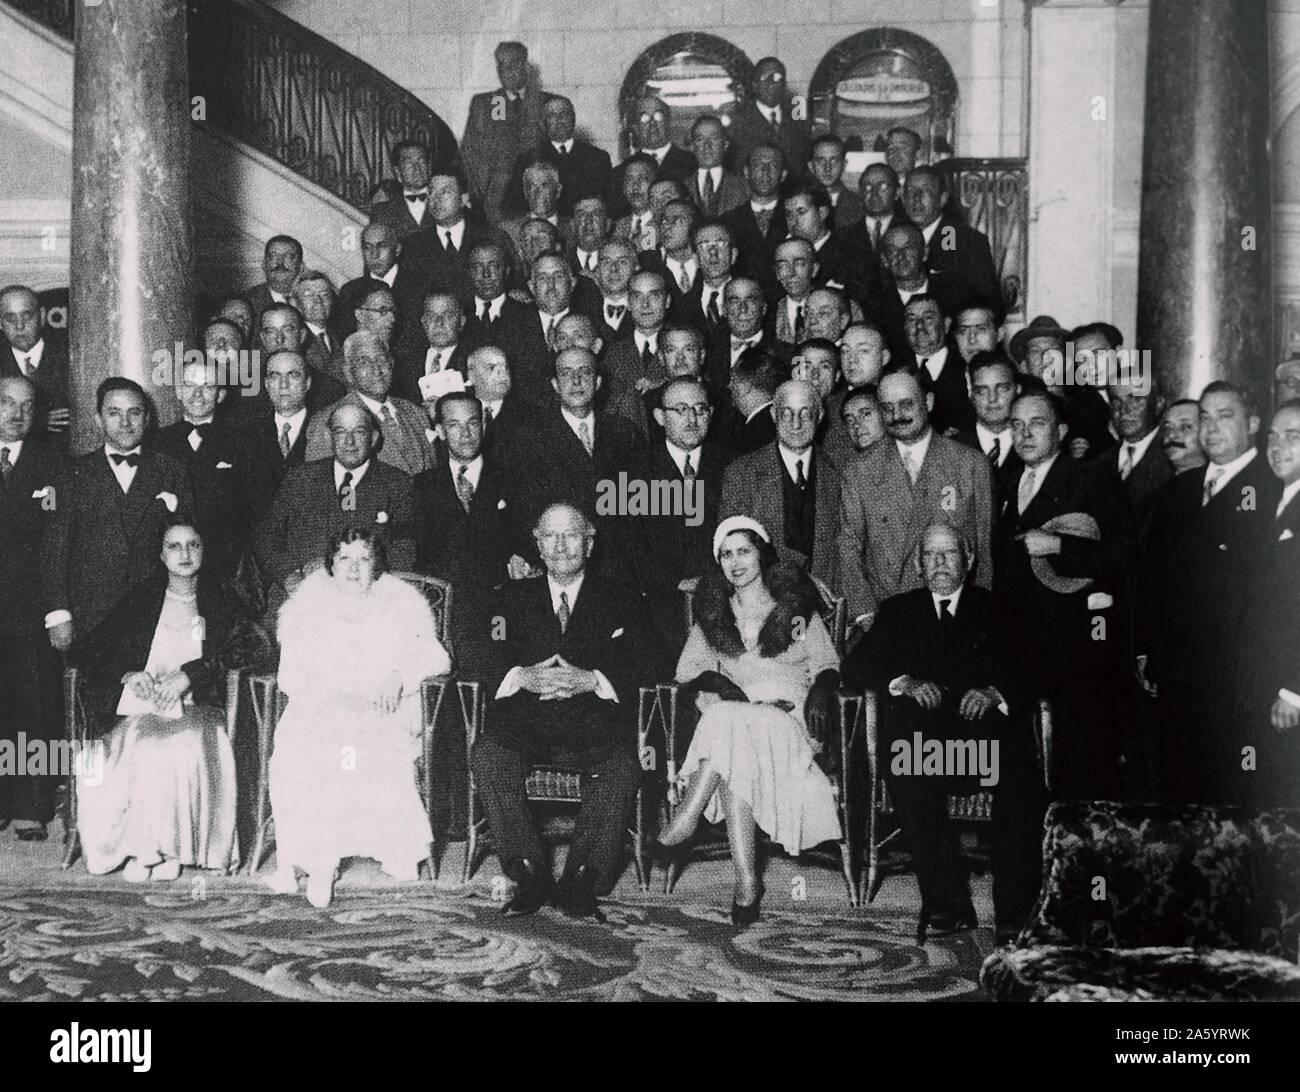 Alejandro Lerroux y seen seated centre (1864 – 1949) was a Spanish politician who was the leader of the Radical Republican Party during the Second Spanish Republic. He served as Prime Minister of Spain three times from 1933 to 1935 and held several cabinet posts as well Stock Photo